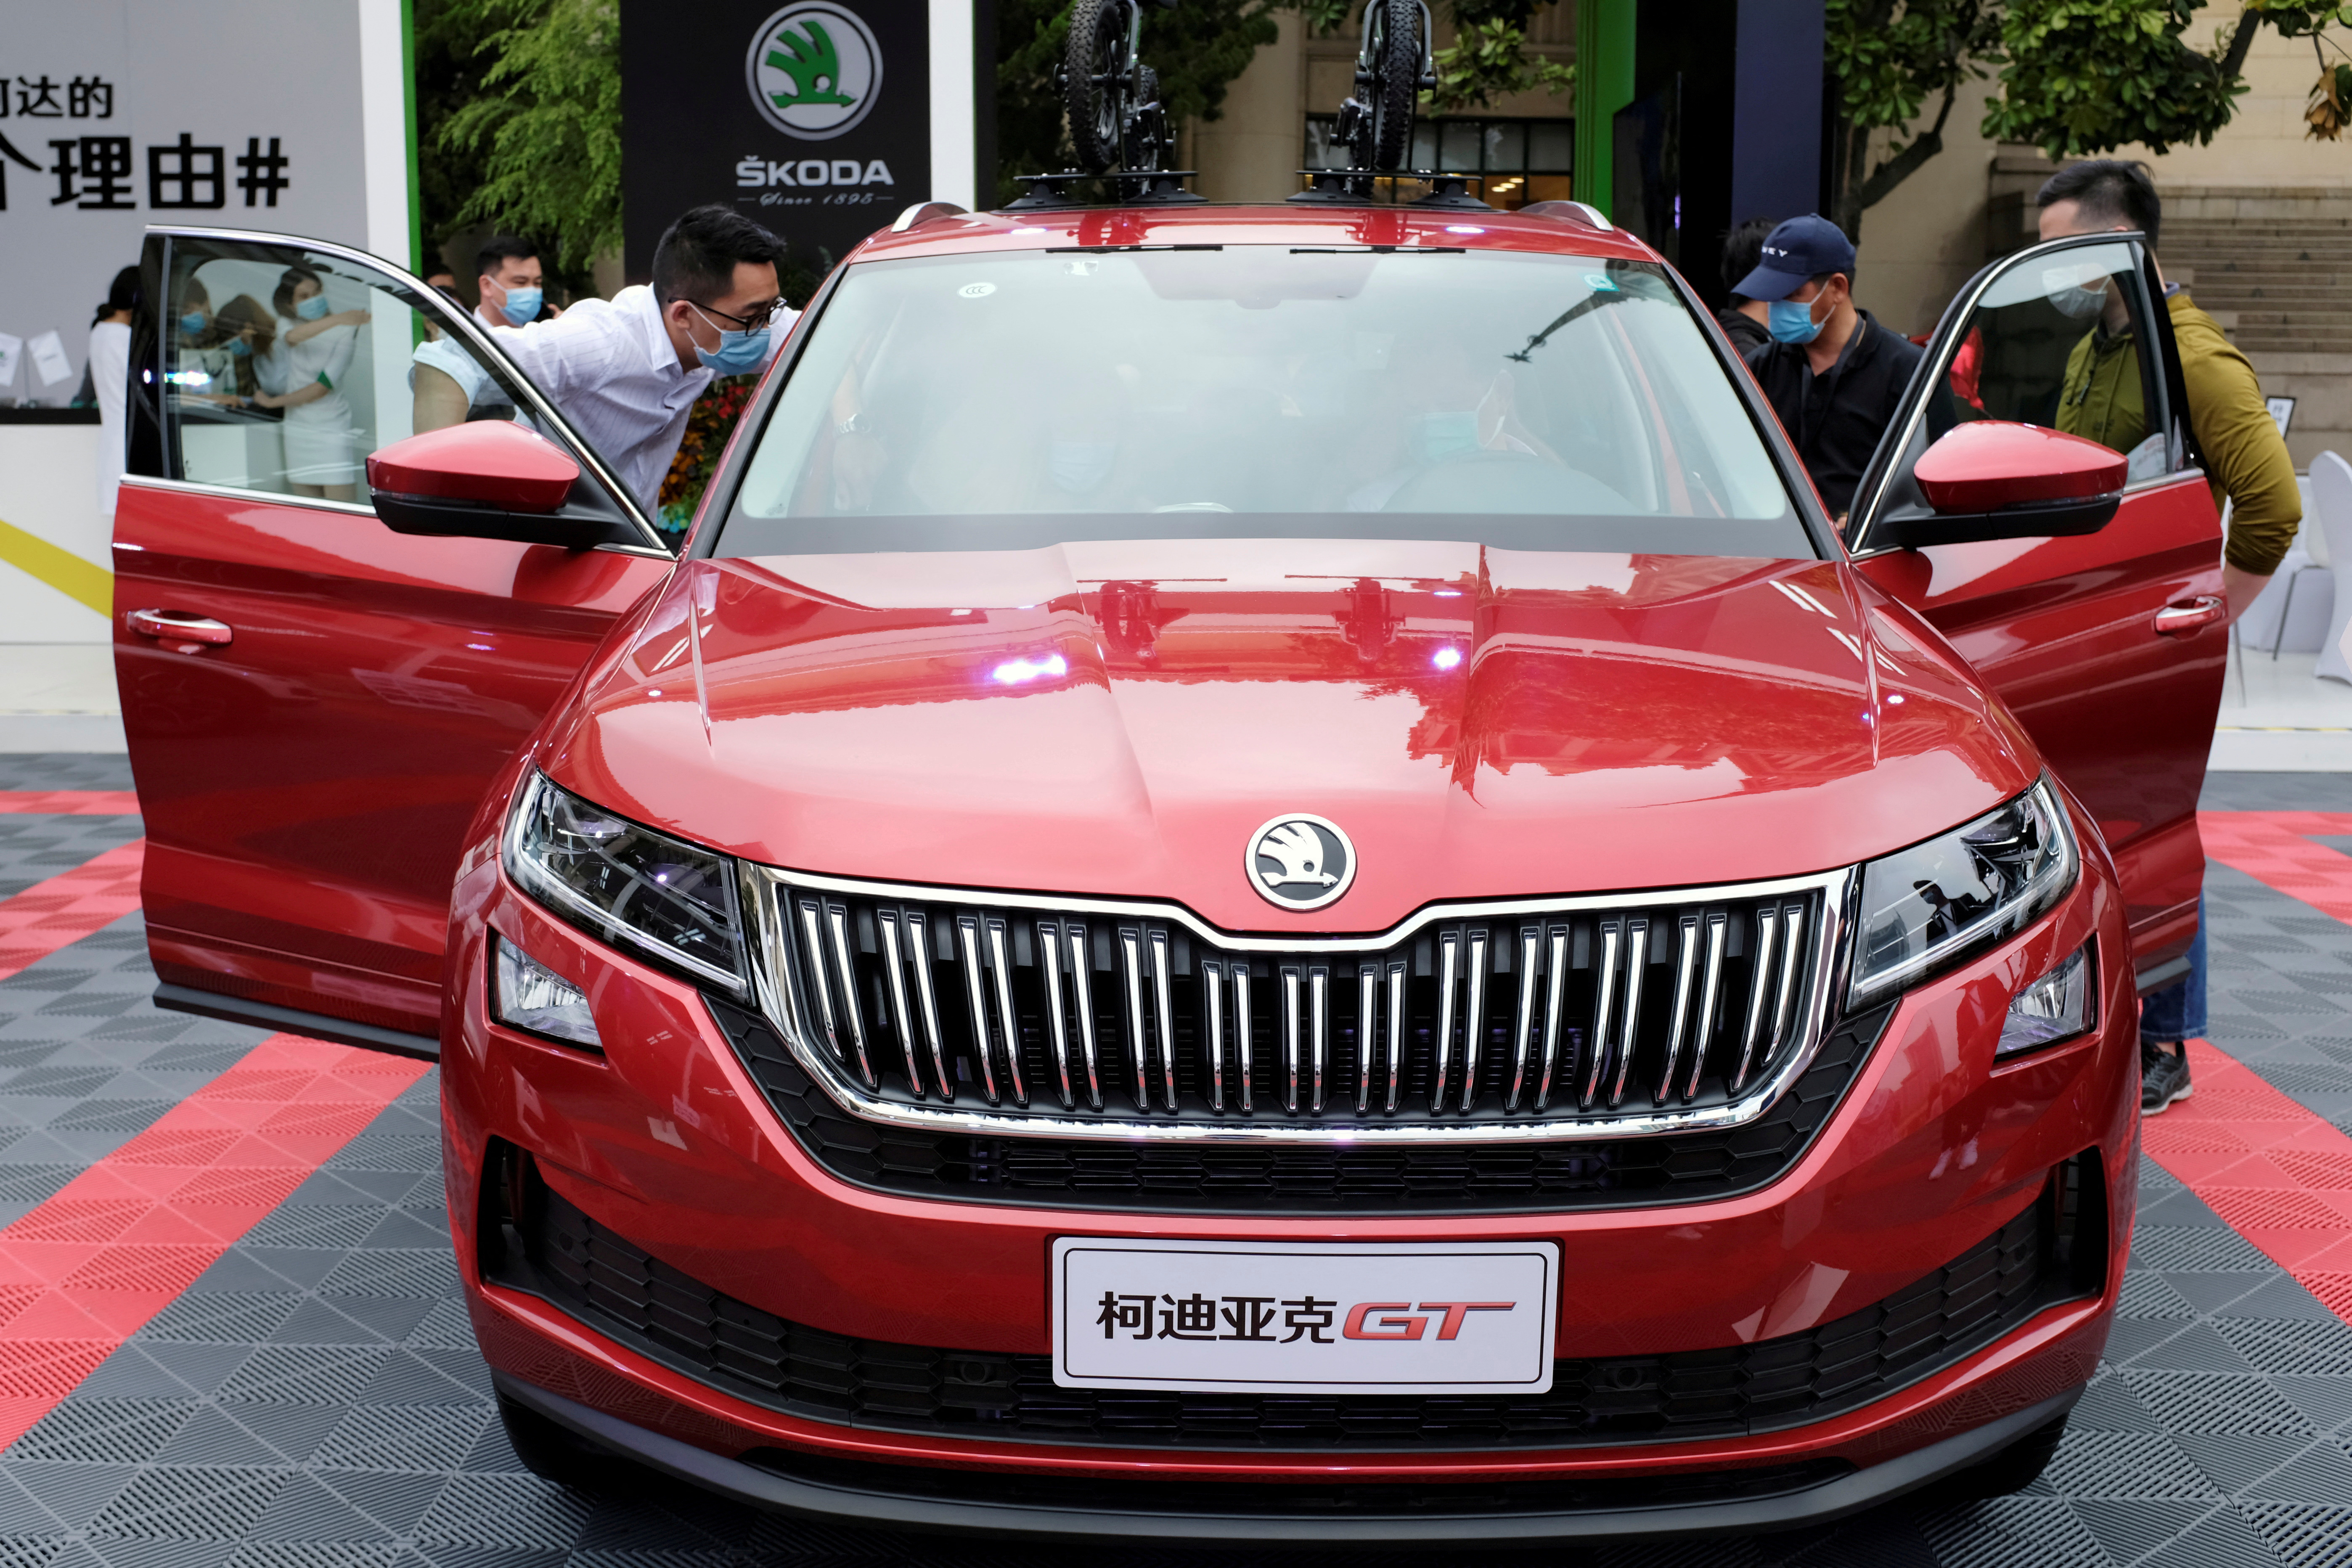 Visitors check a Skoda vehicle at a sales event in Shanghai